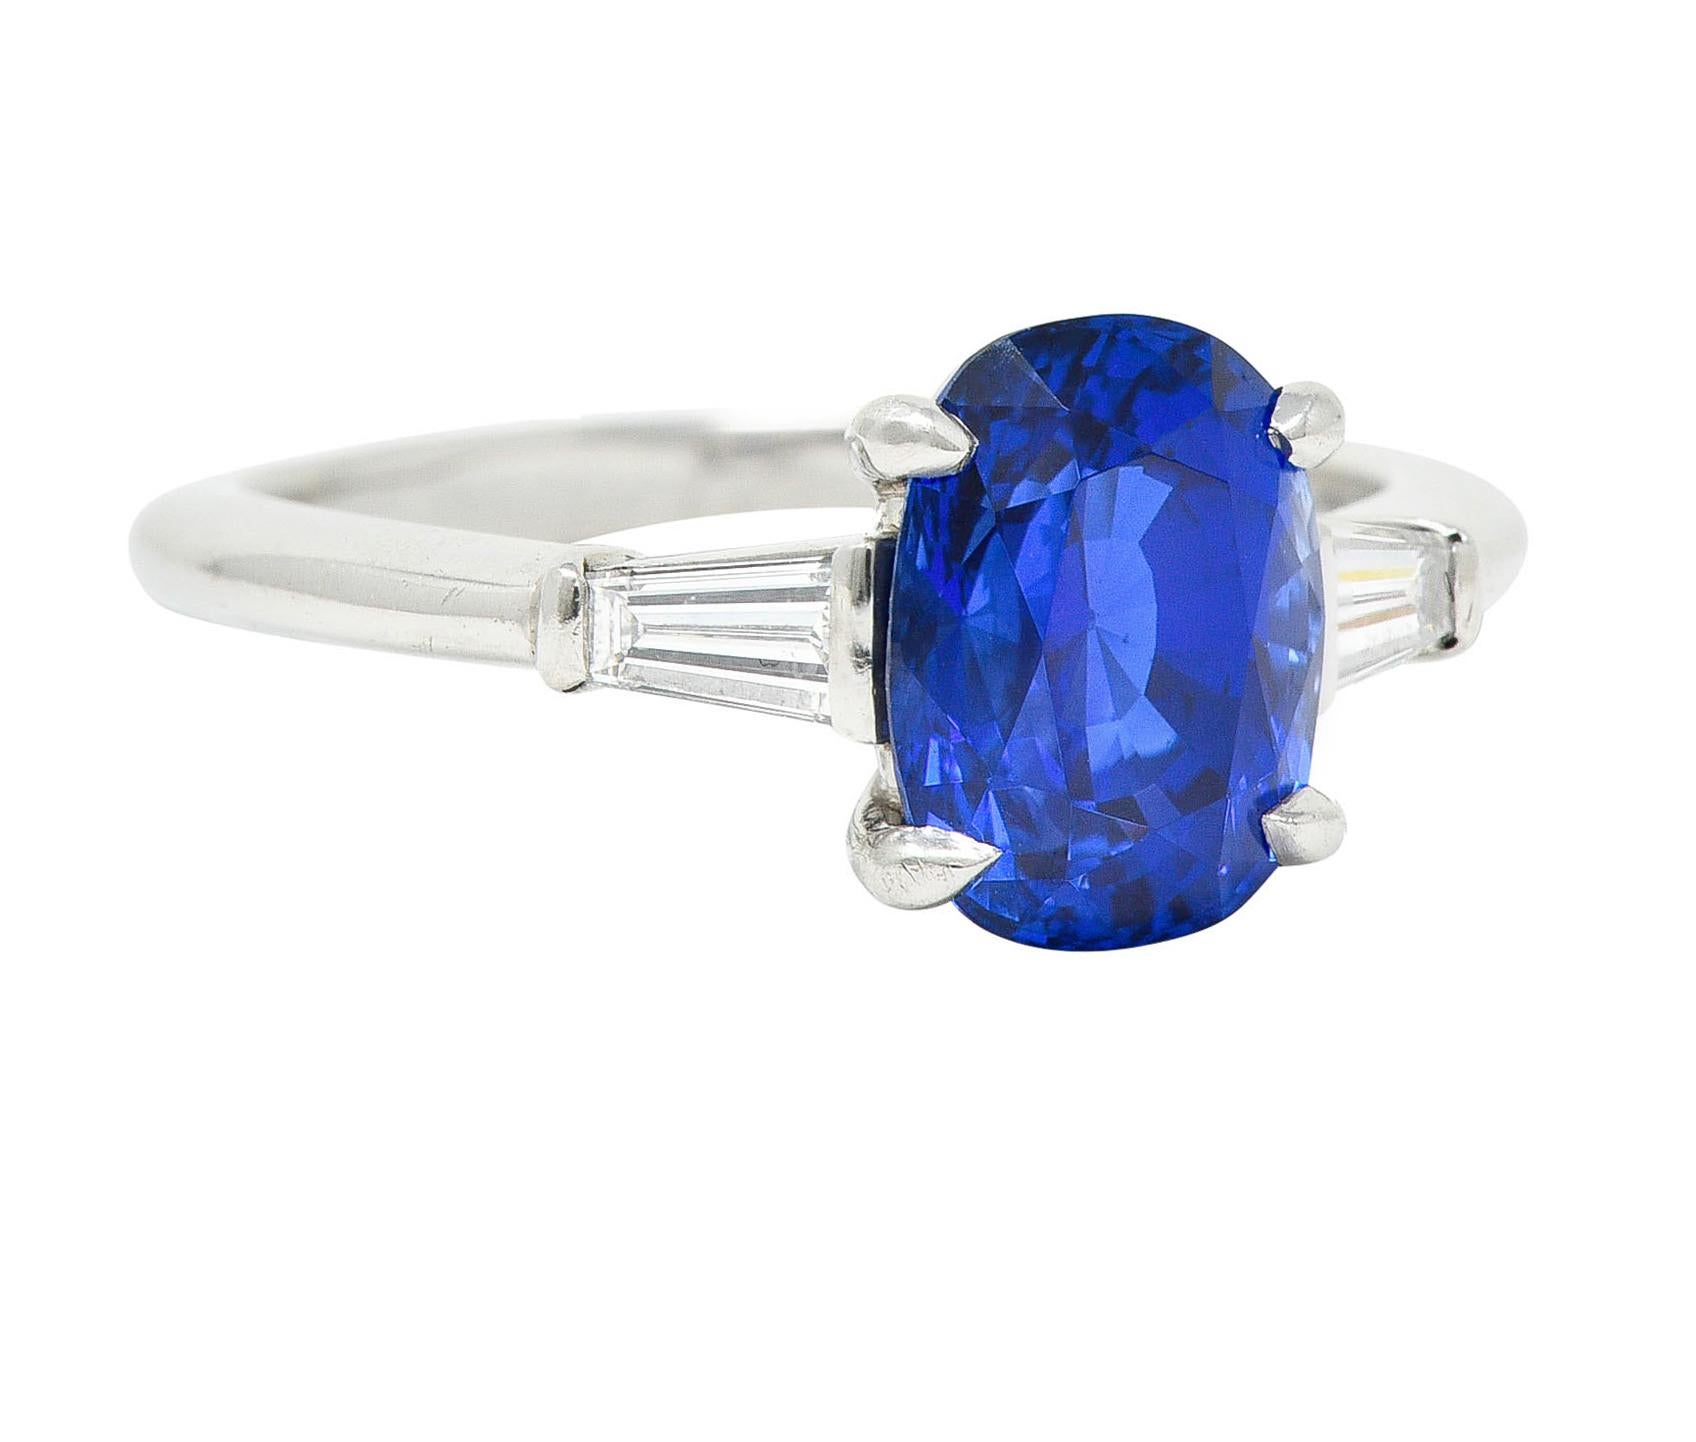 Three stone ring centers a cushion brilliant cut sapphire weighing 3.24 carats

Strongly violetish blue in color with no indications of heat - Madagascar origin

Basket set and flanked by cathedral shoulders bar set by tapered baguette cut